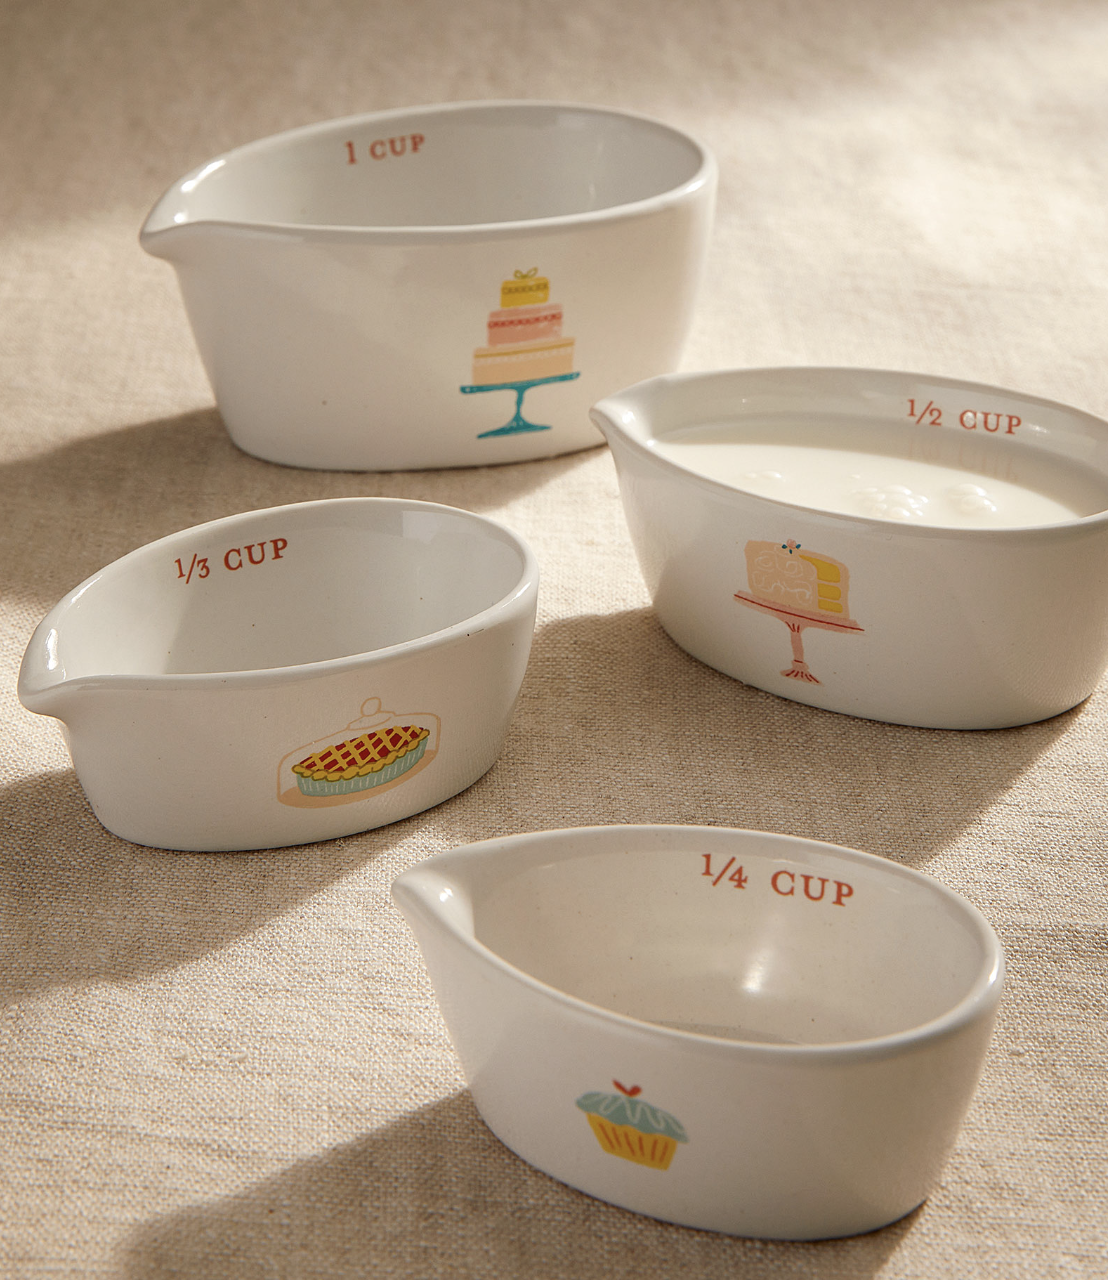 the measuring cups on a burlap table cloth